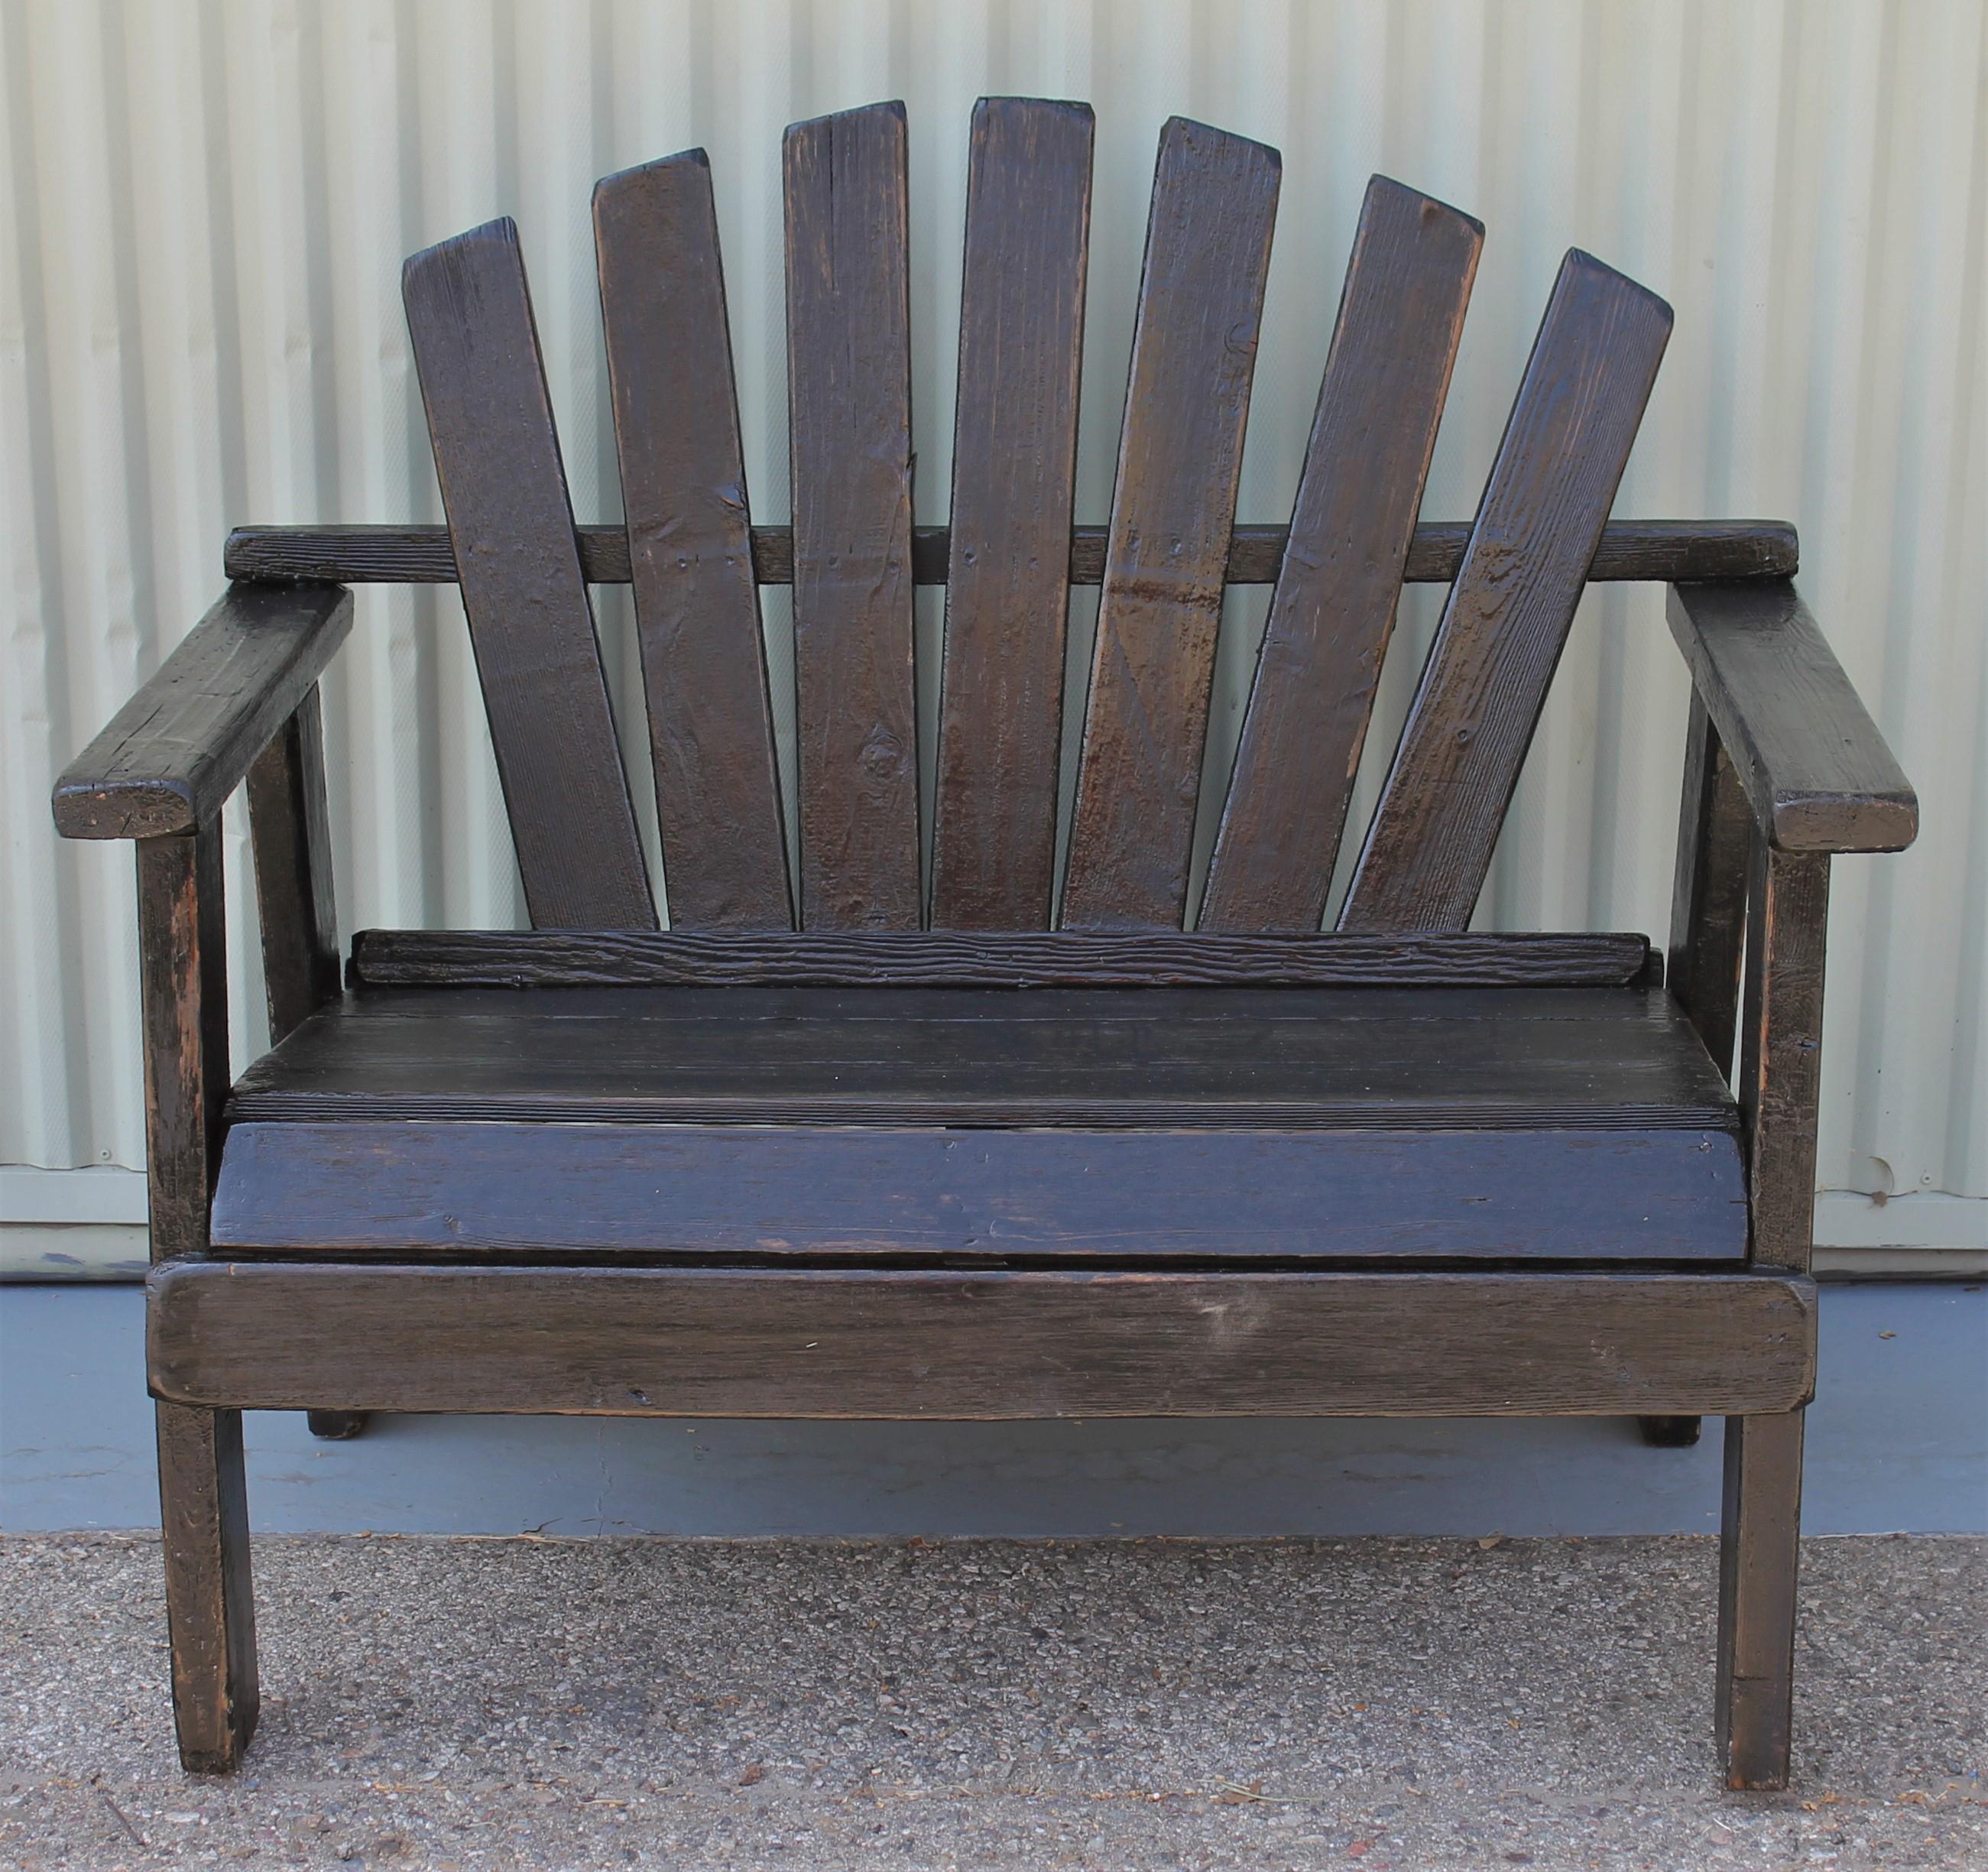 This fine bench is in old black worn paint with a coating of outdoor weather protector. It can be flat or satin surface but protects from rain or beach salt water air born. This settee comes from a mid-western cabin feel. The side chair matches the